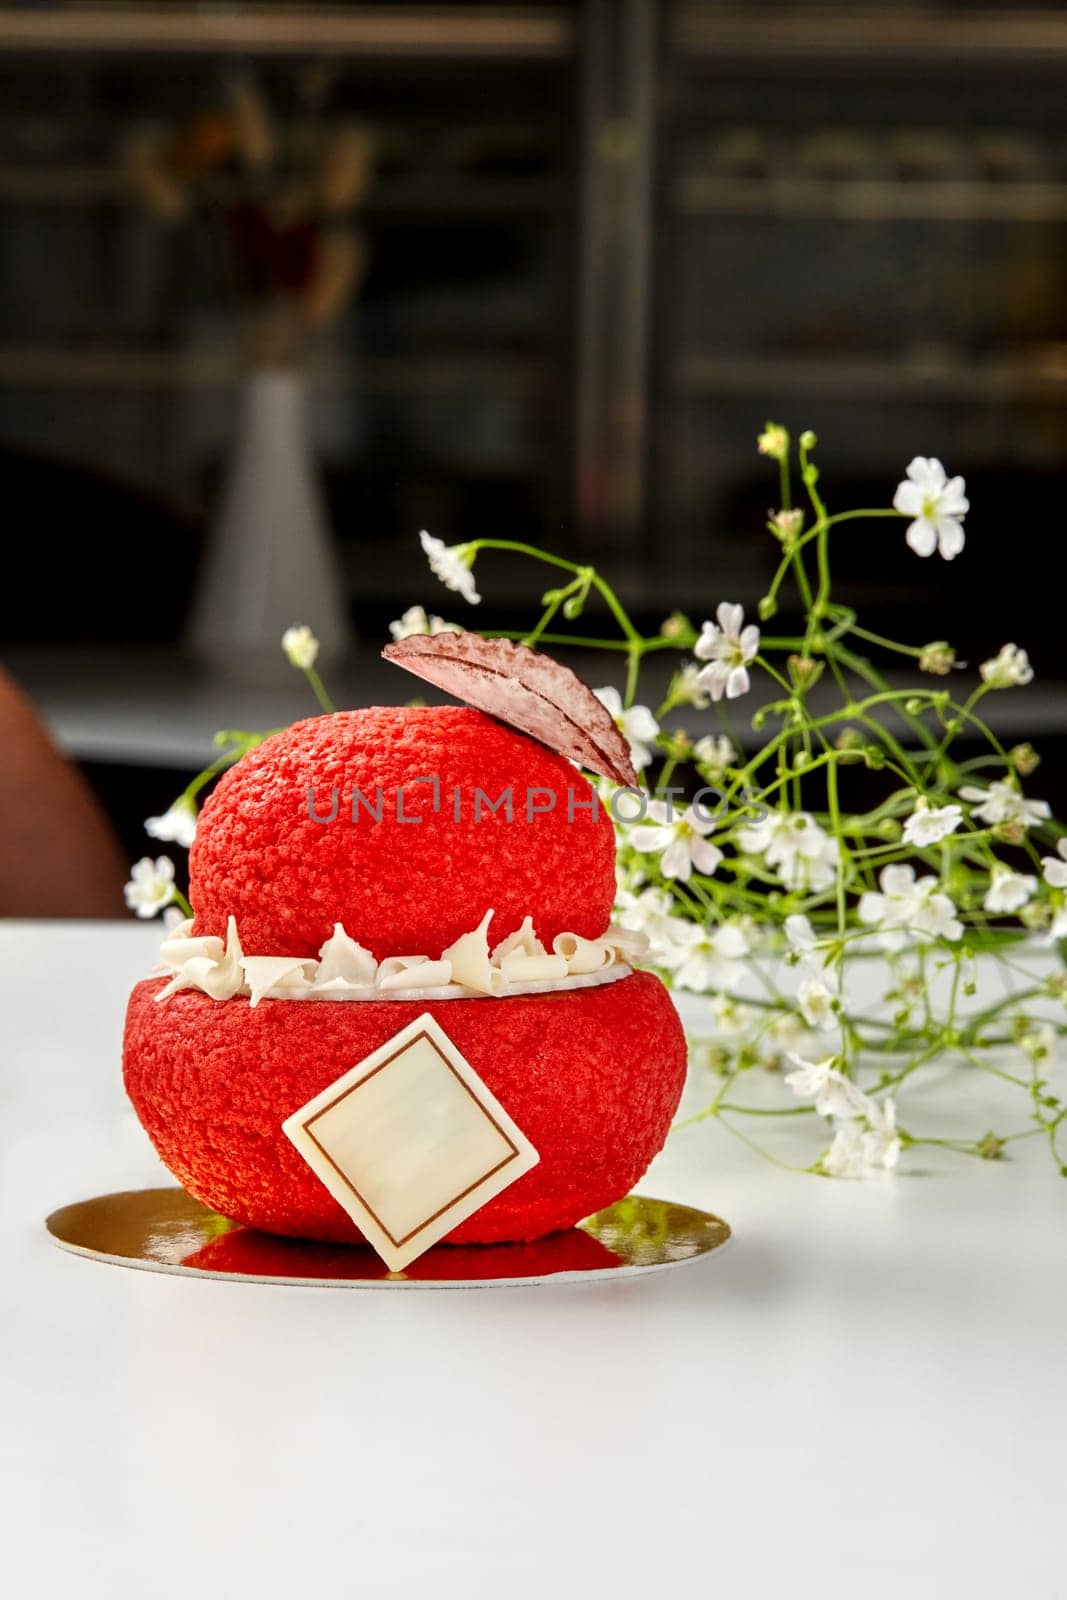 Tempting red choux pastry with crunchy craquelin with vanilla custard decorated with white chocolate petals and branded plaque on golden cardboard with delicate flowers. Signature handmade desserts